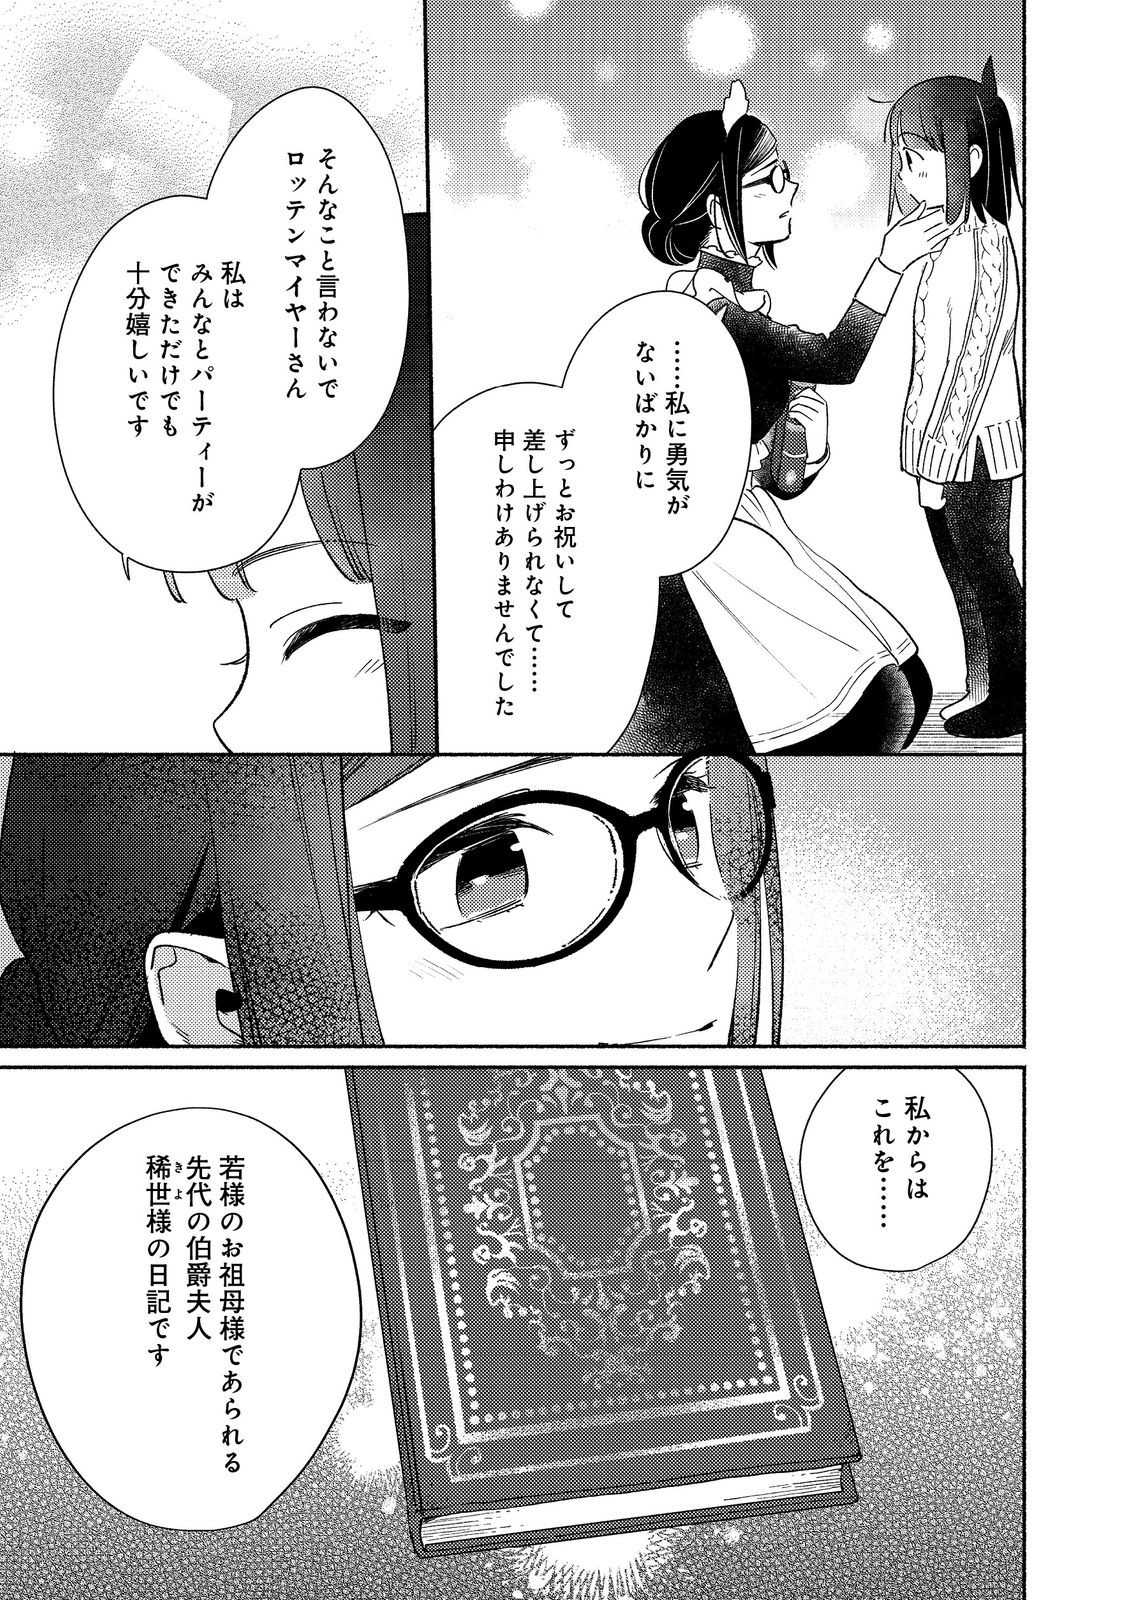 I’m the White Pig Nobleman 第26.1話 - Page 13